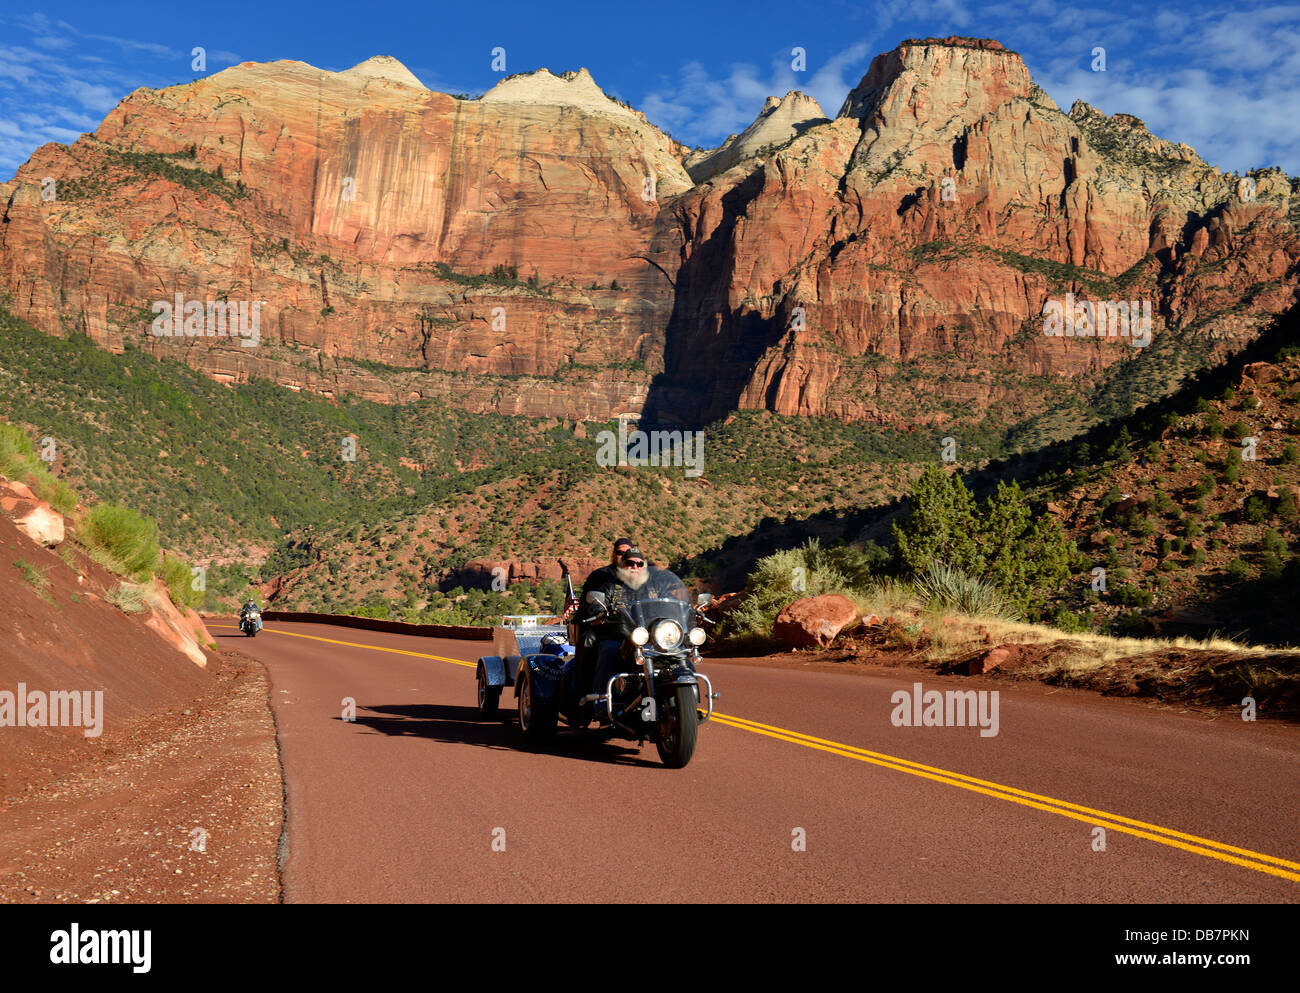 Harley Davidson motorcycle on the red road of Zion Park Boulevard - Mount Carmel U.S. Highway 9, in front of the Towers of the Stock Photo